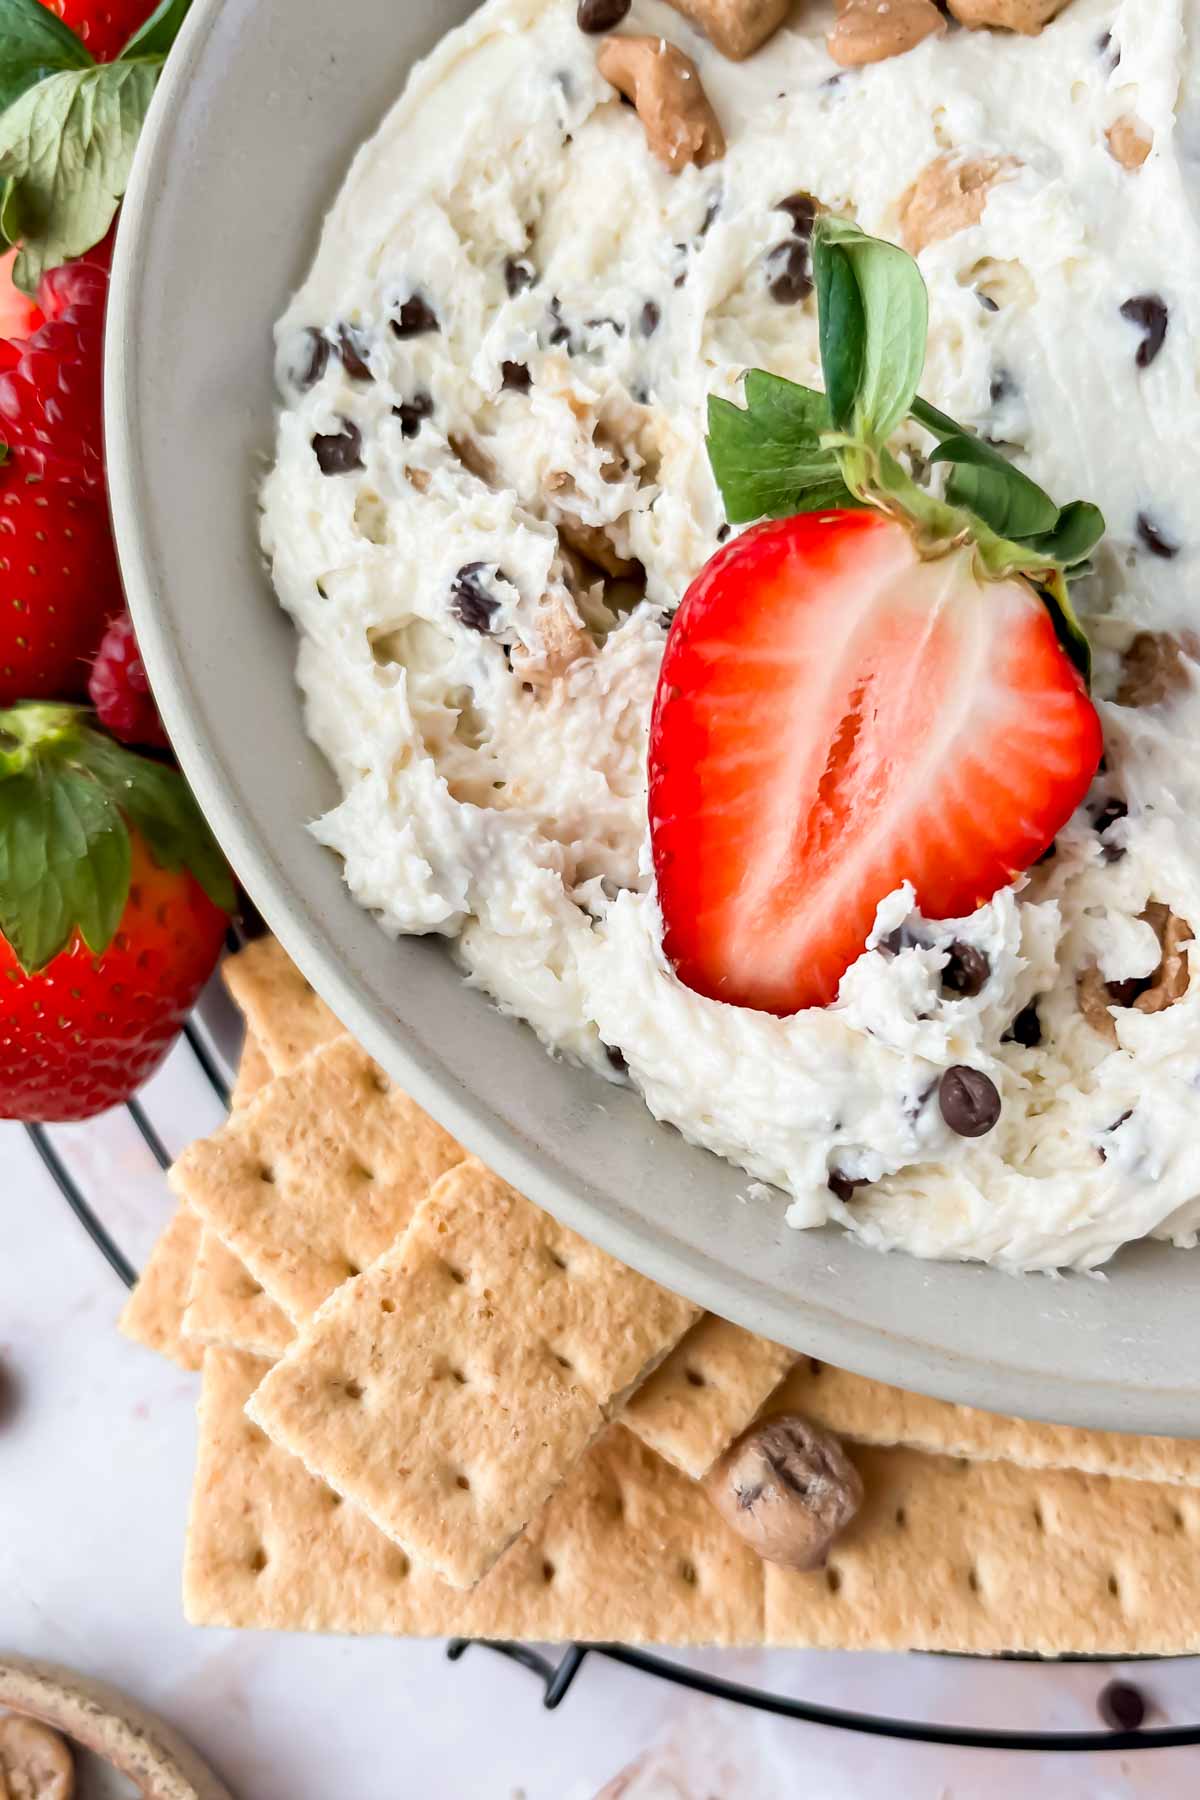 strawberry dipped into cottage cheese cookie dough dip.